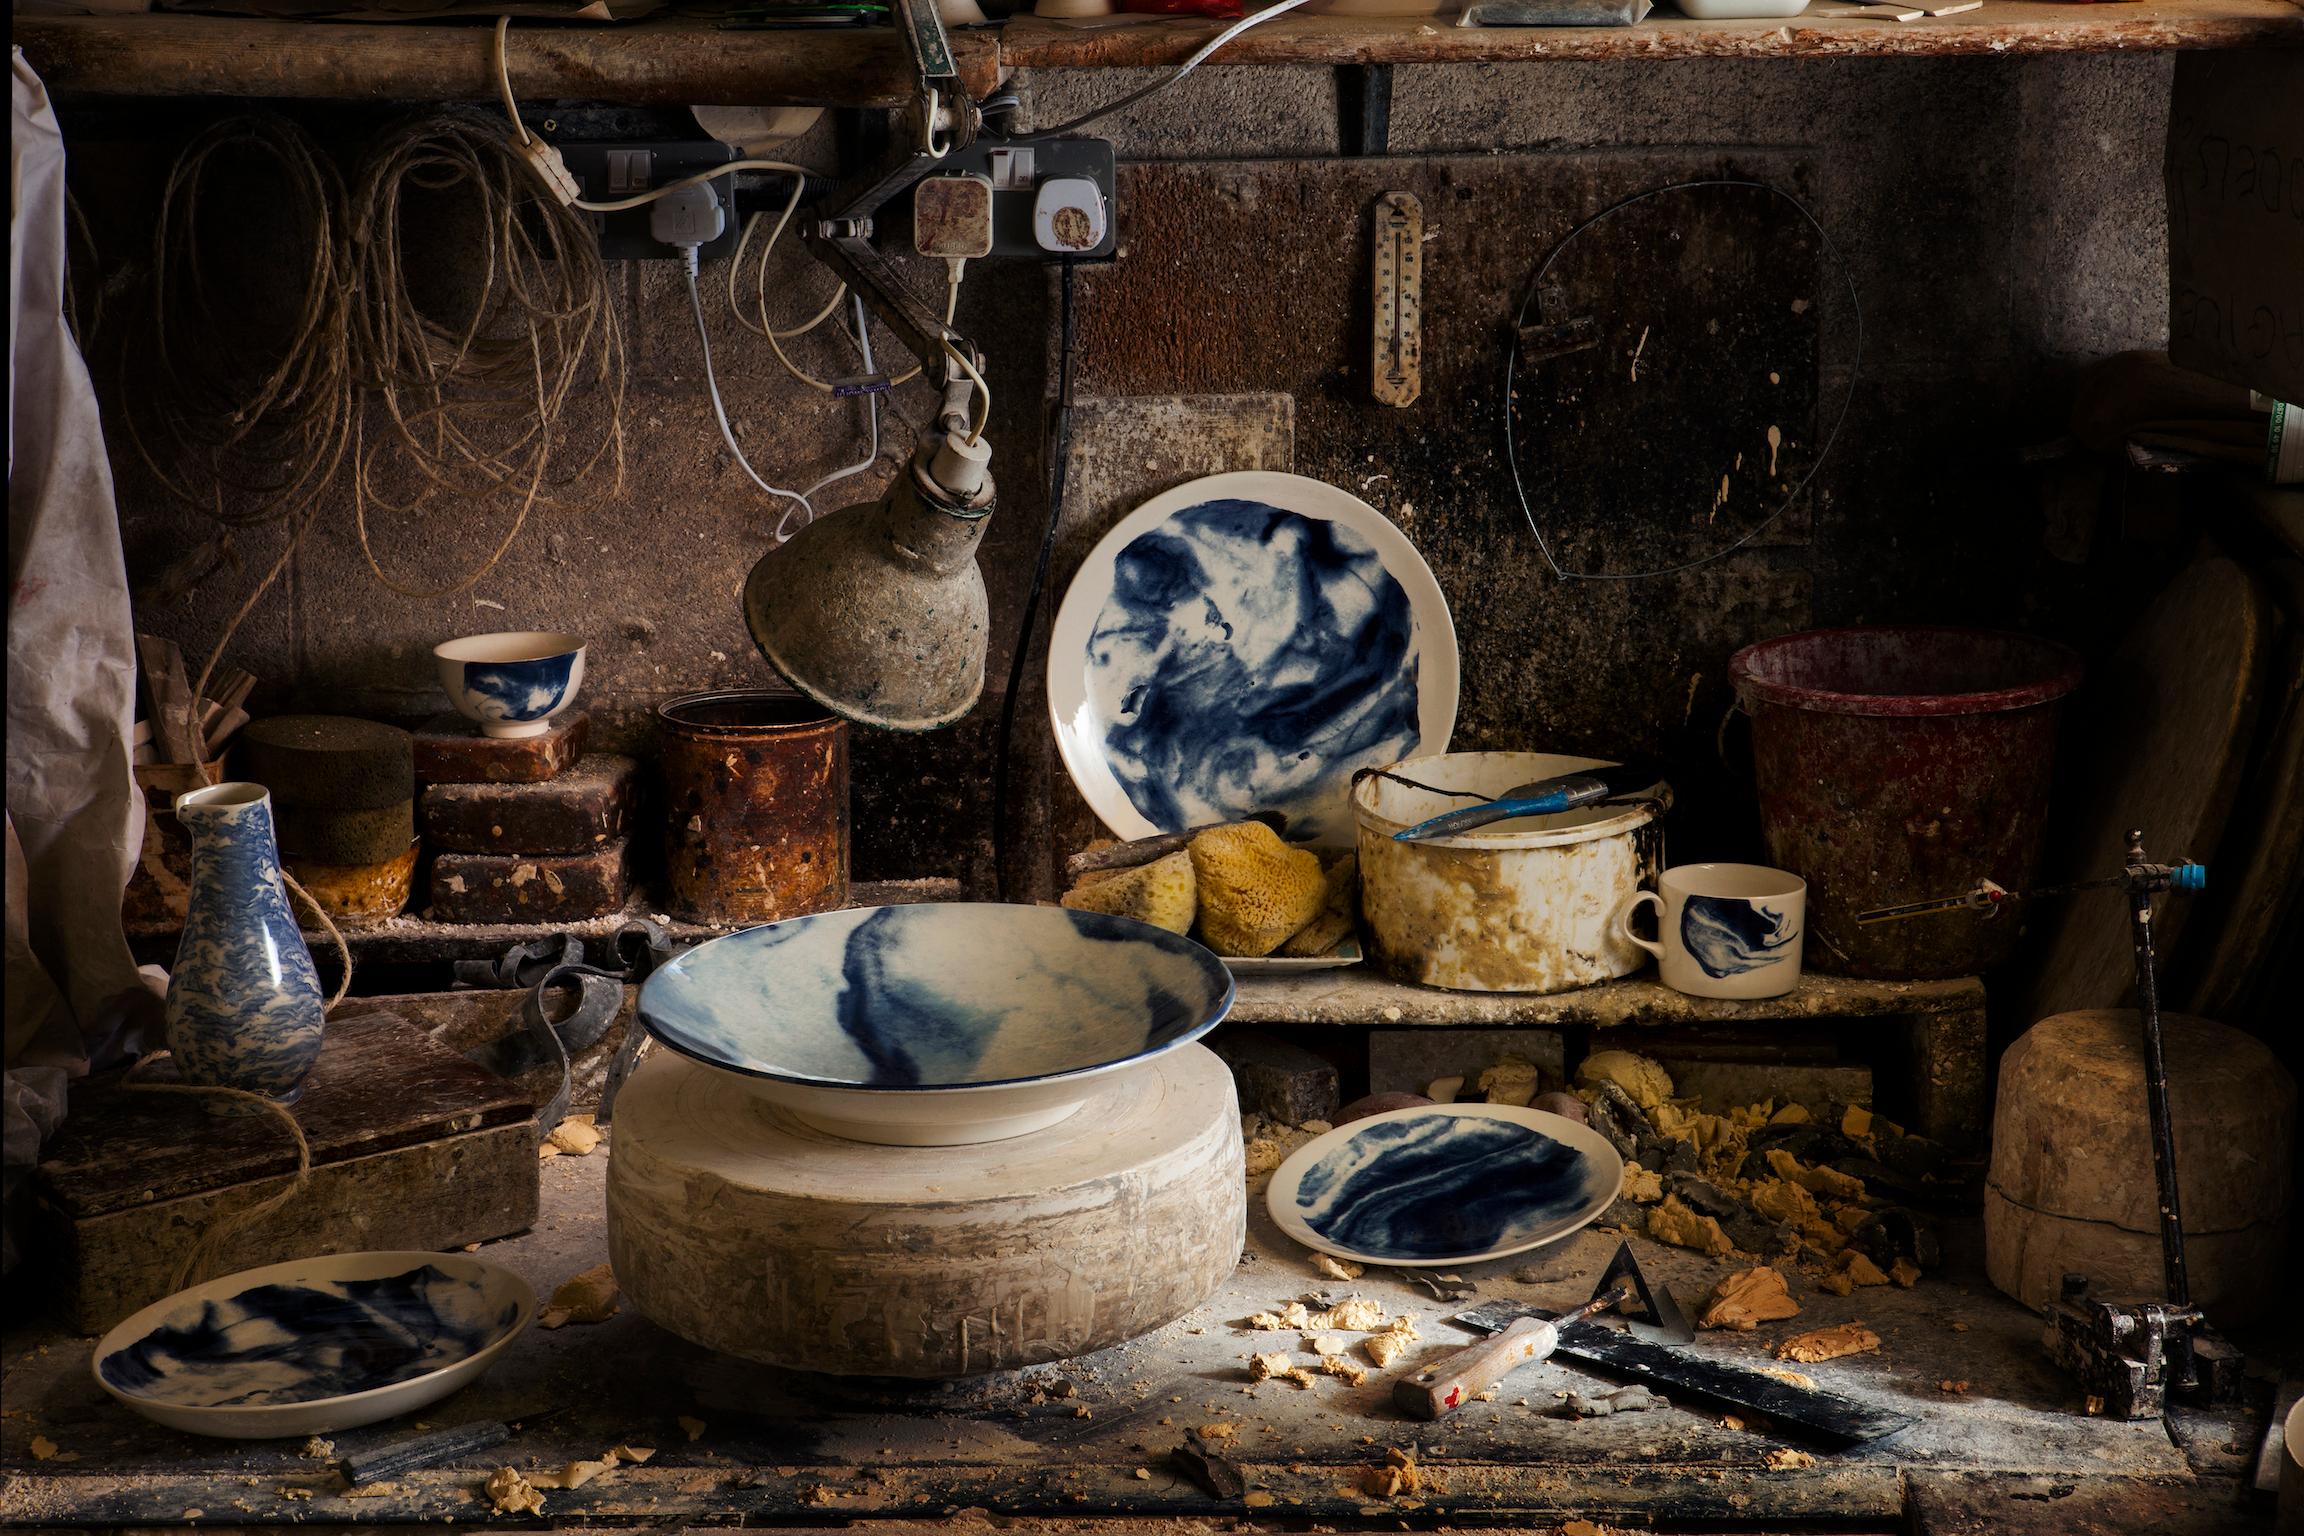 Indigo Storm, 1882 Ltd. with Faye Toogood. Faye Toogood’s range of ceramic designs for 1882 Ltd. celebrates the accidental beauty of natural imperfections. Indigo Storm is a bold interpretation of traditional creamware forms; drawing upon the chance